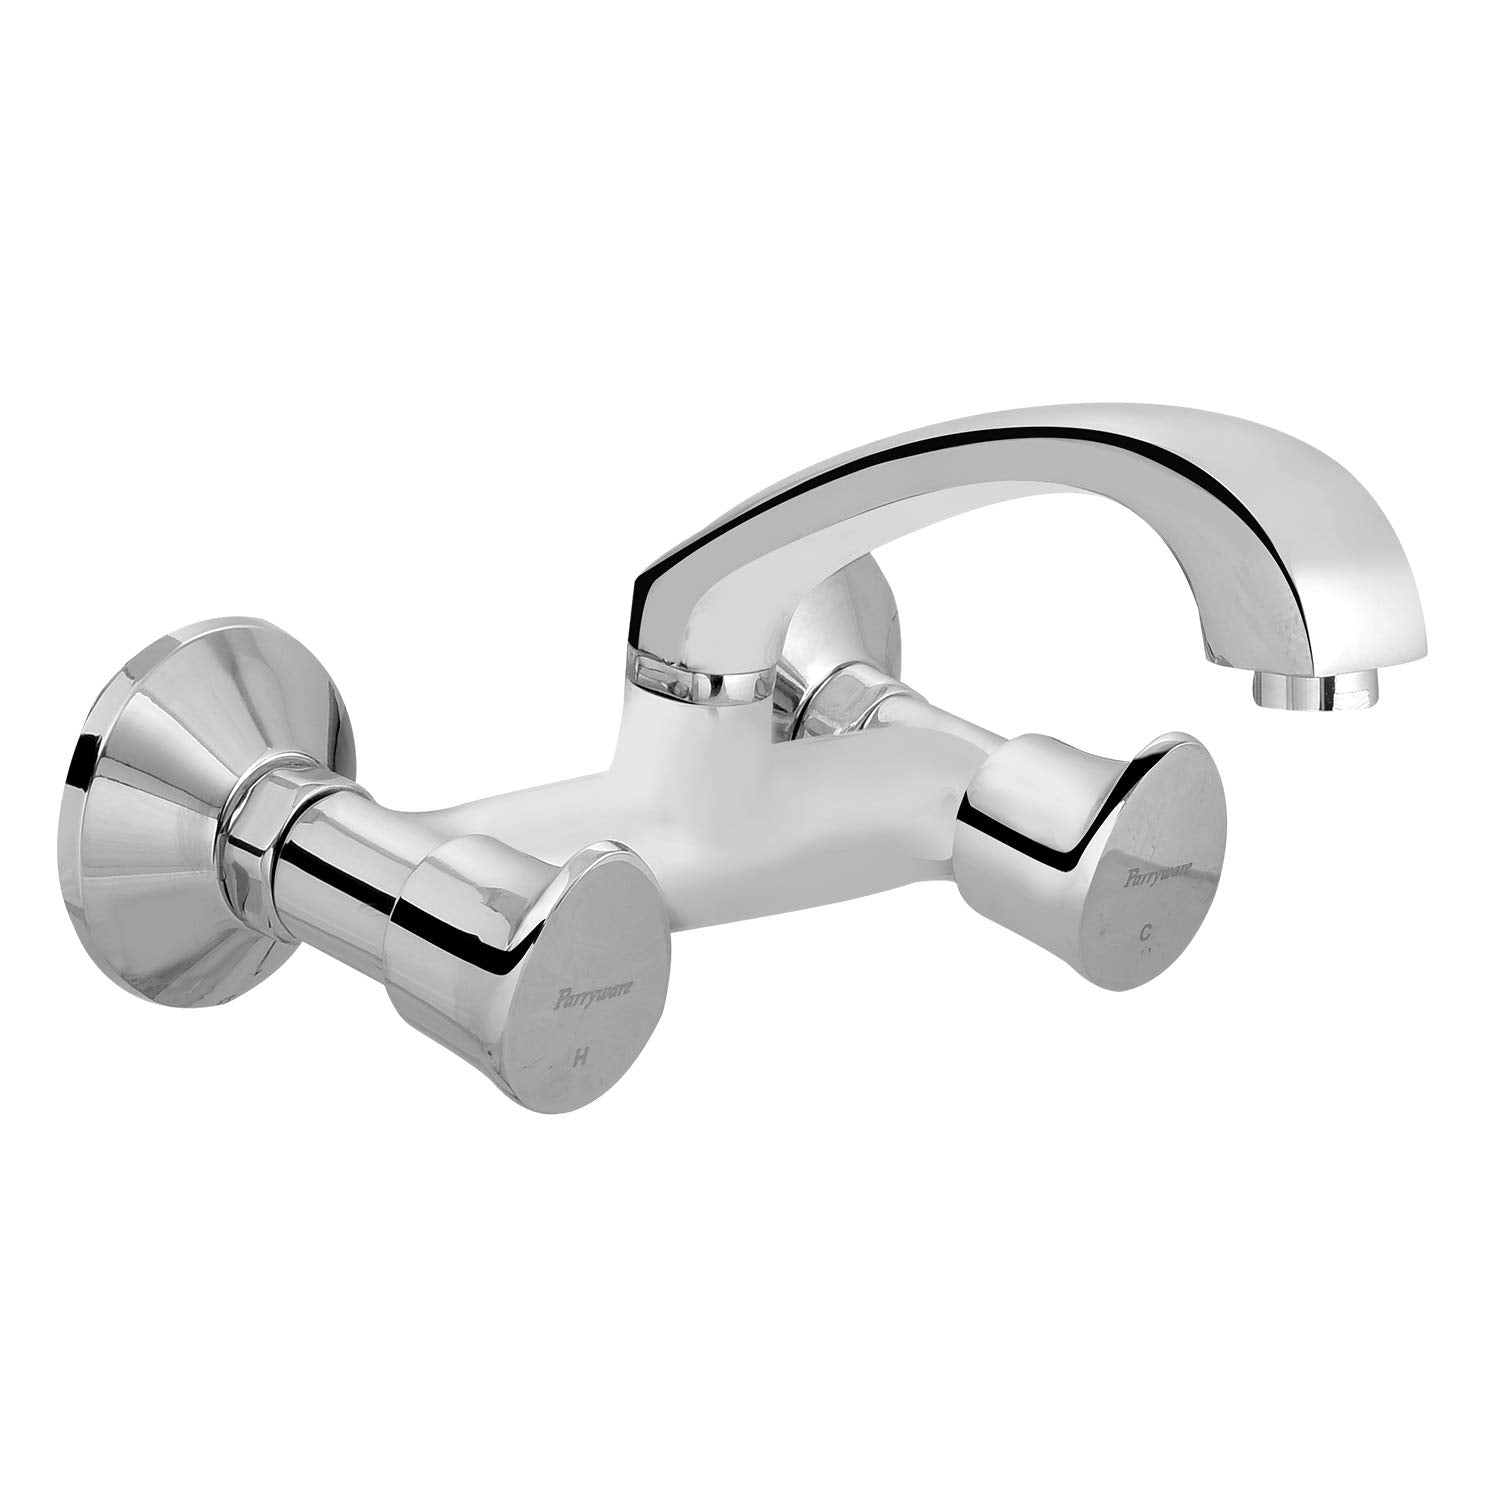 Parryware G4736A1 Droplet Wall Mounted Sink Mixer (Casted Brass Spout)